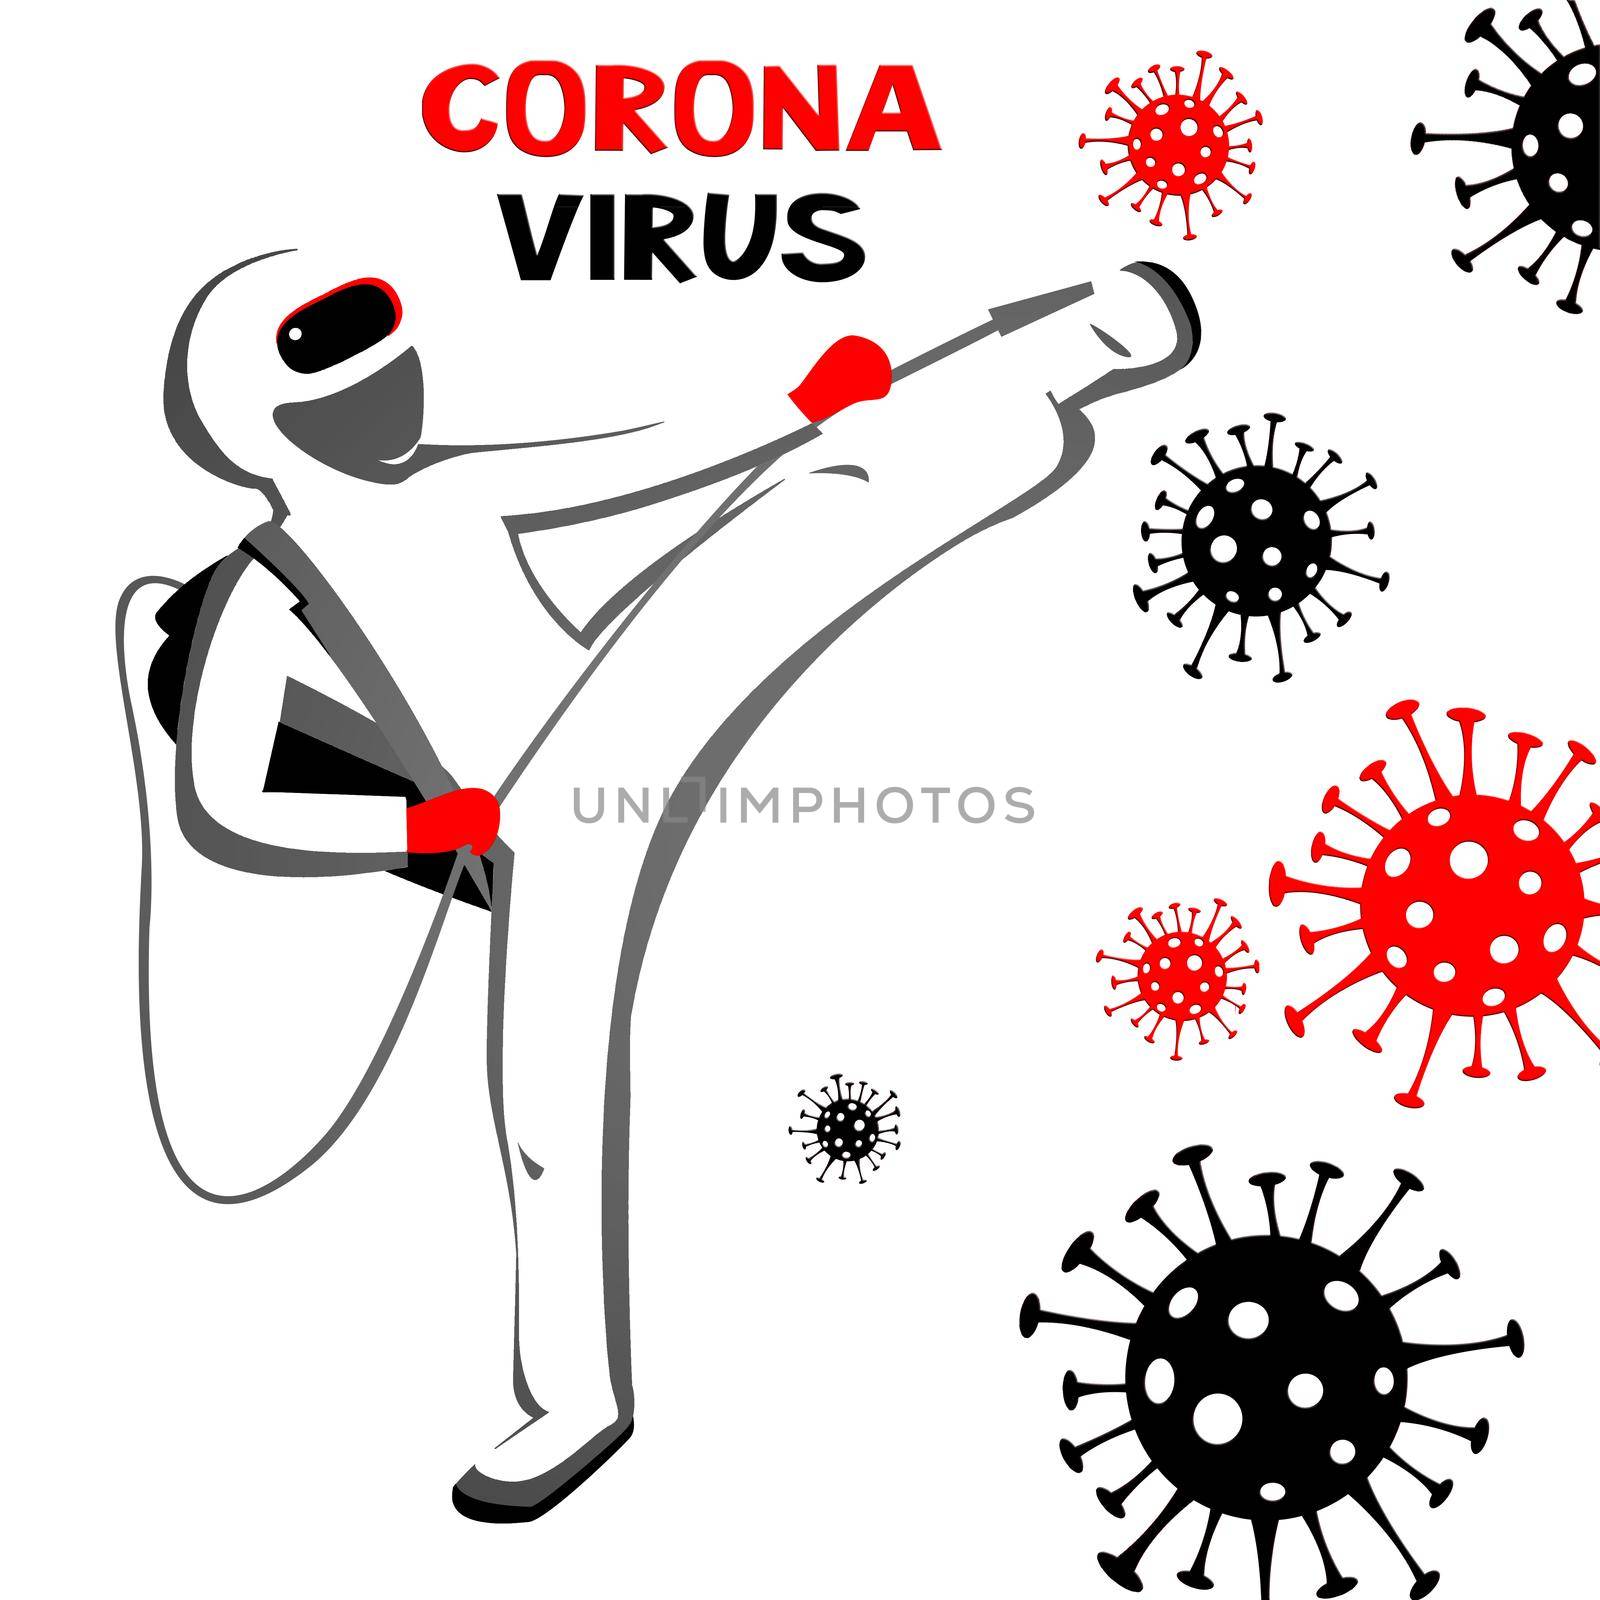 Doctor against new coronavirus infection. 3D illustration by Taut